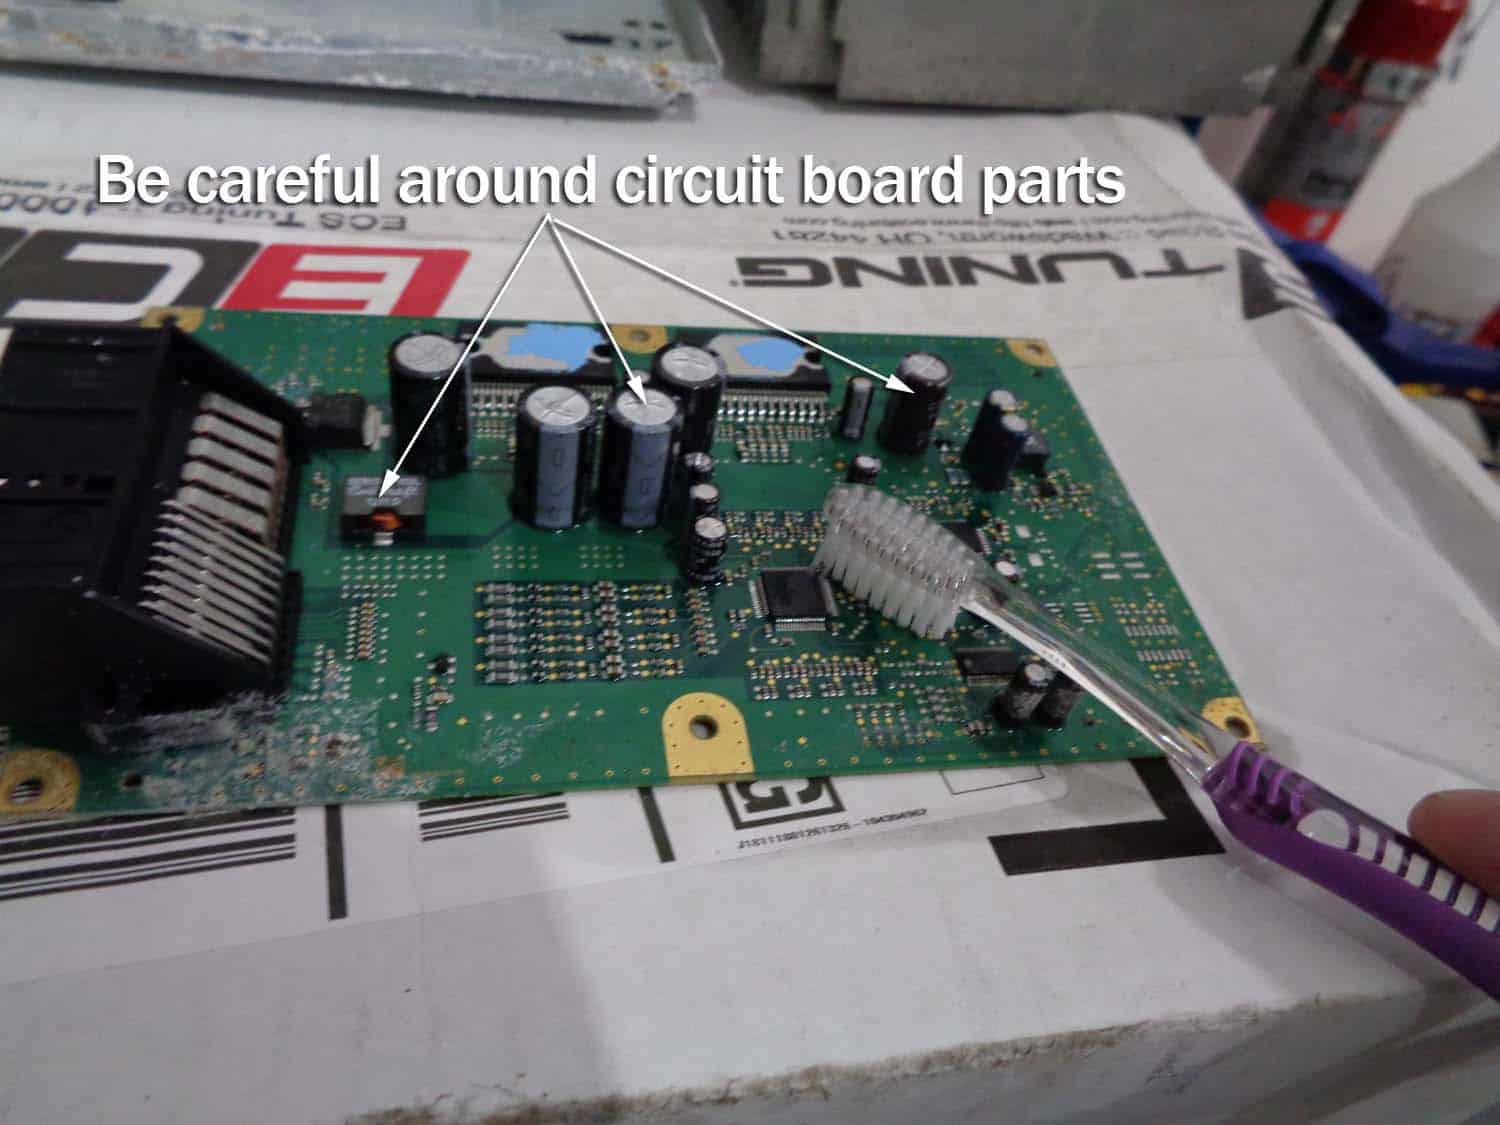 bmw e90 amplifier water damage repair - carefully clean the circuit board with toothbrush